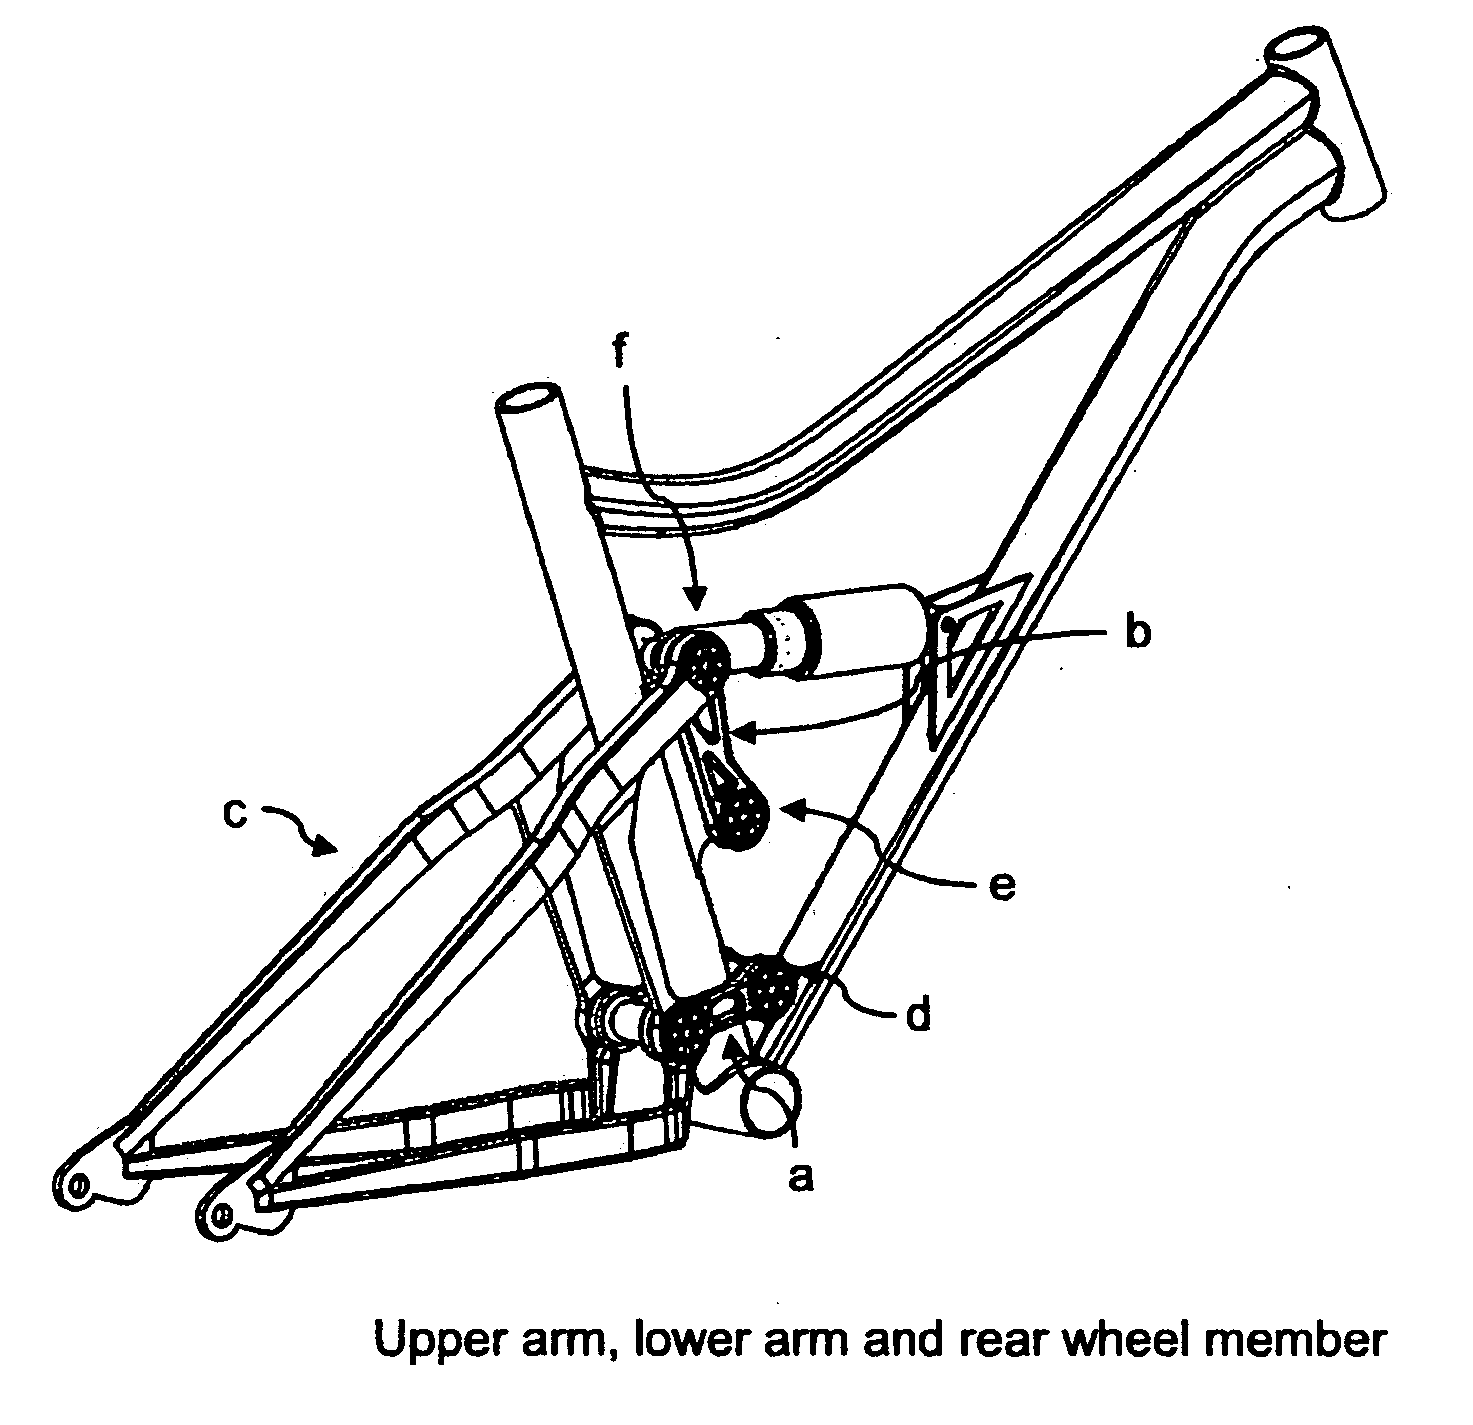 Suspension System for Chain-Driven or Belt-Driven Vehicles